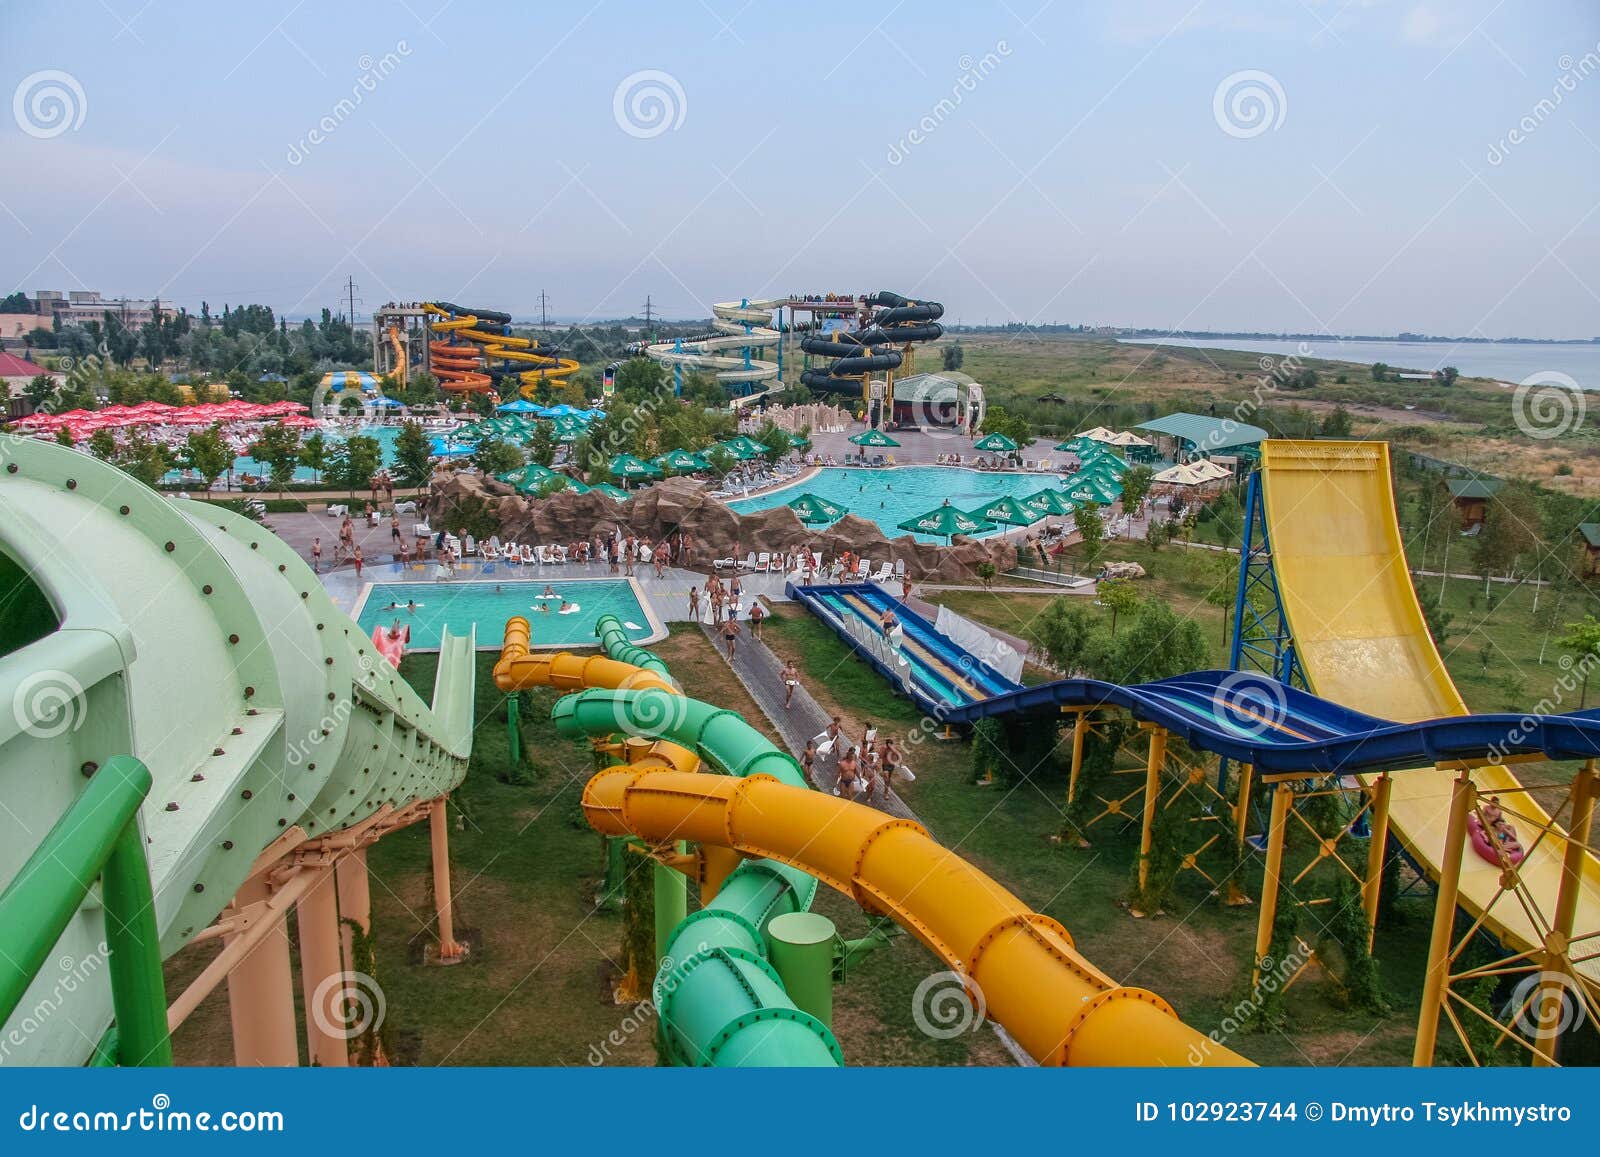 Water Attractions in the Water Park Editorial Stock Image - Image of ...